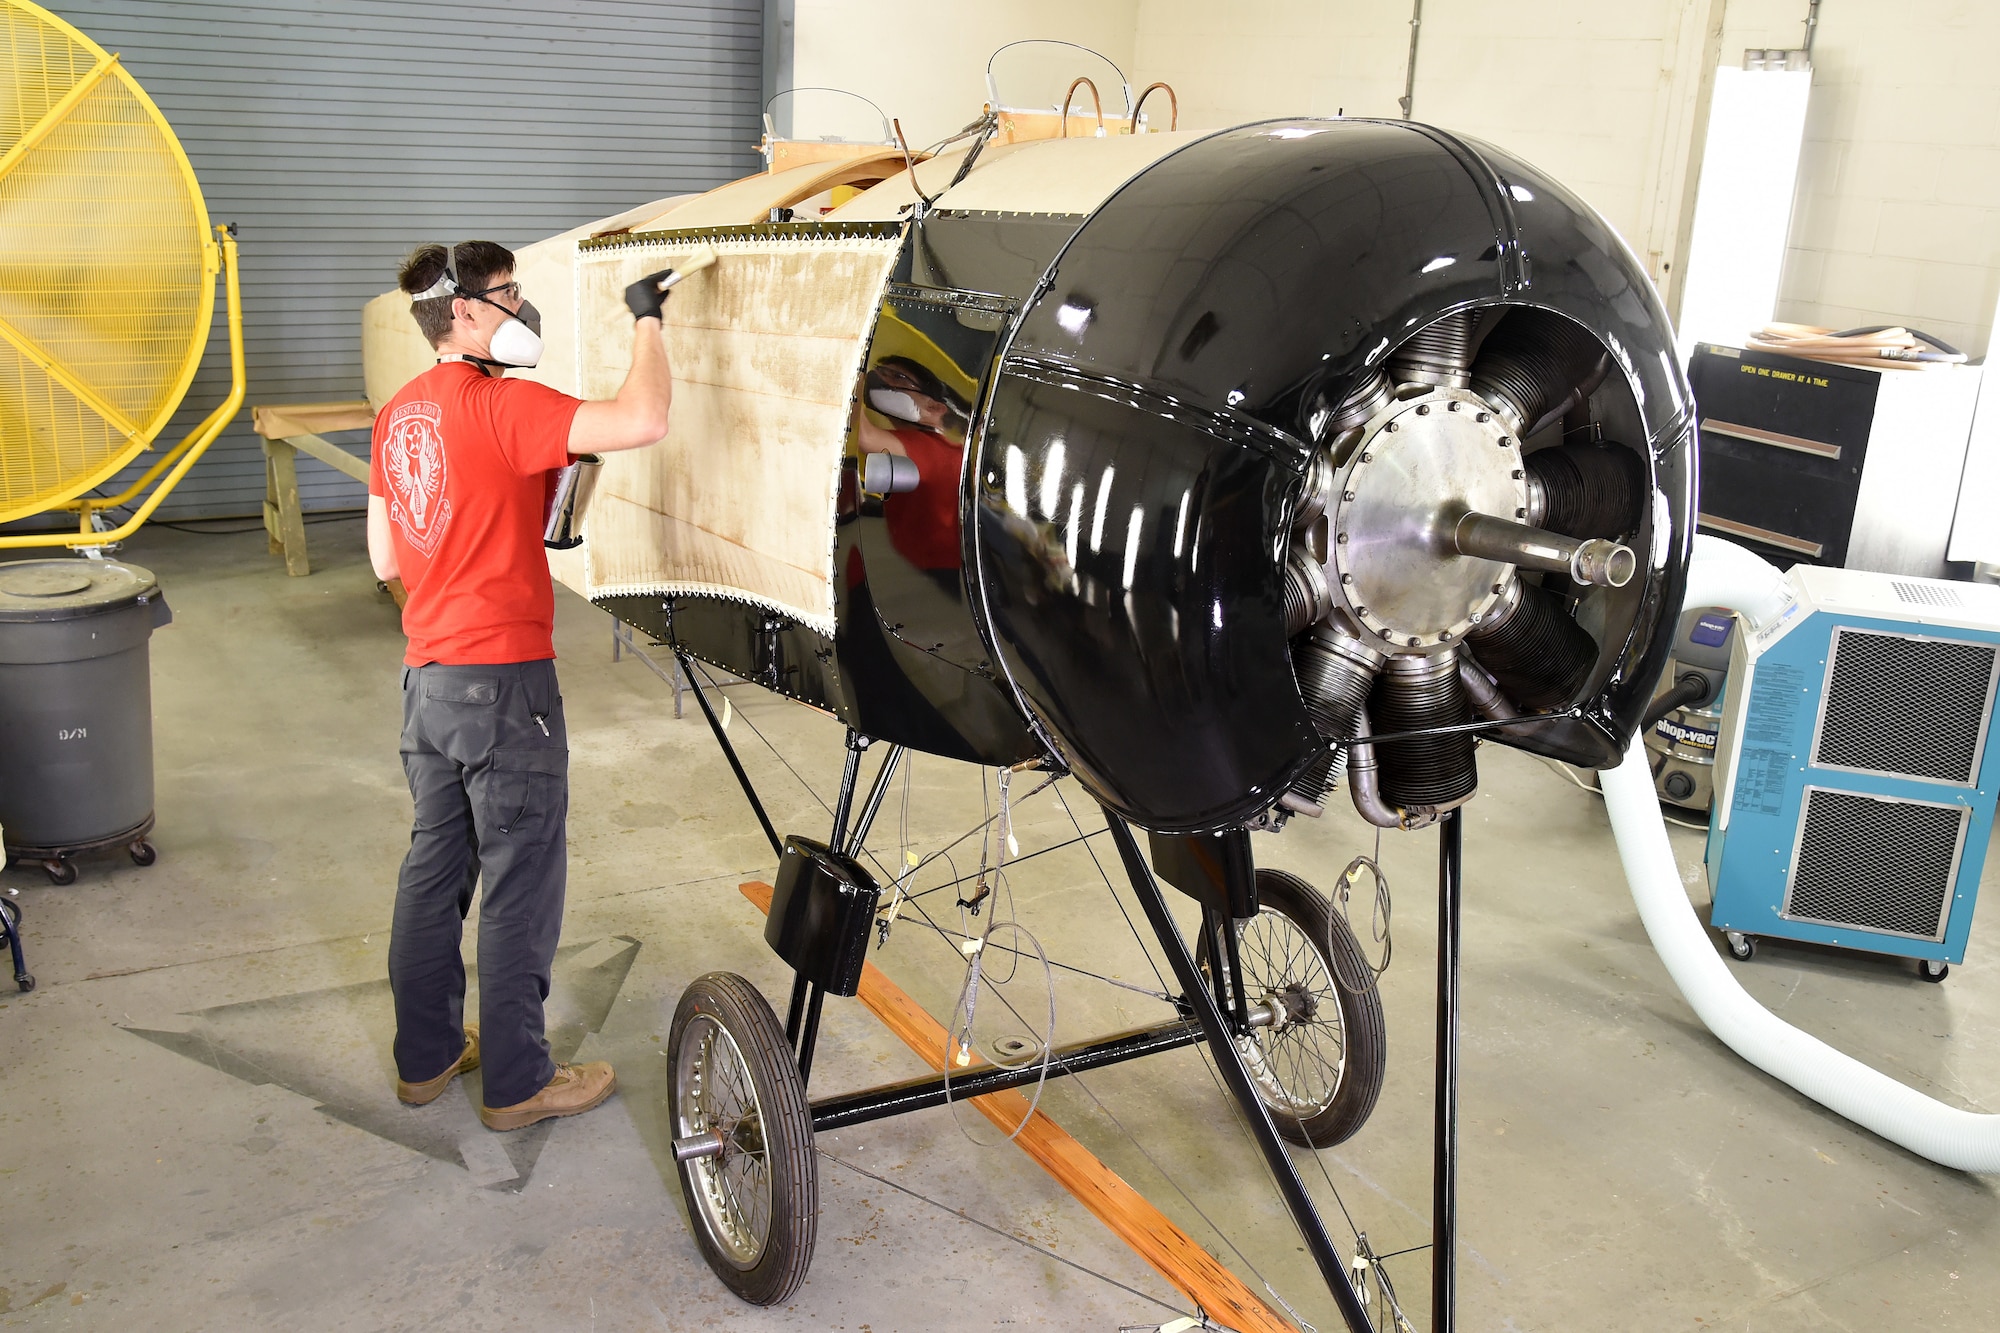 DAYTON, Ohio -- Museum restoration specialist Casey Simmons applies 50/50 dope to the Avro 504K fuselage on Aug. 7, 2019. This aircraft was originally built in 1966 by the Royal Canadian Air Force's Aircraft Maintenance & Development Unit. Preserving the Air Force's proud legacy, the Restoration Division restores aircraft and aerospace vehicles to historically accurate and visually striking levels. (U.S. Air Force photo by Ken LaRock)